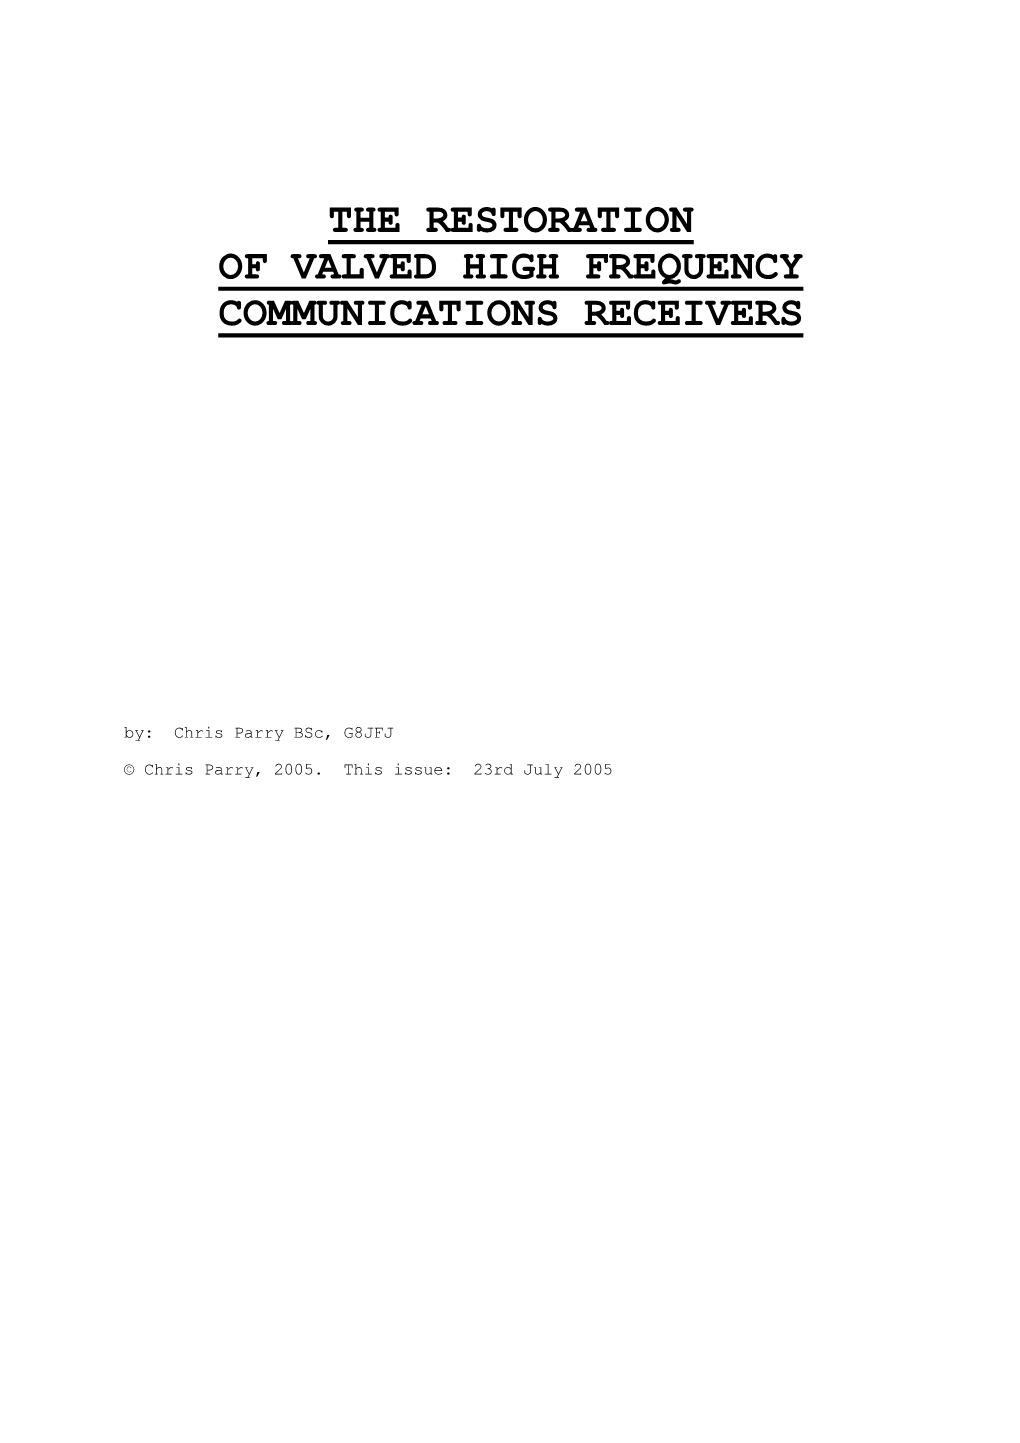 The Restoration of Valved High Frequency Communications Receivers